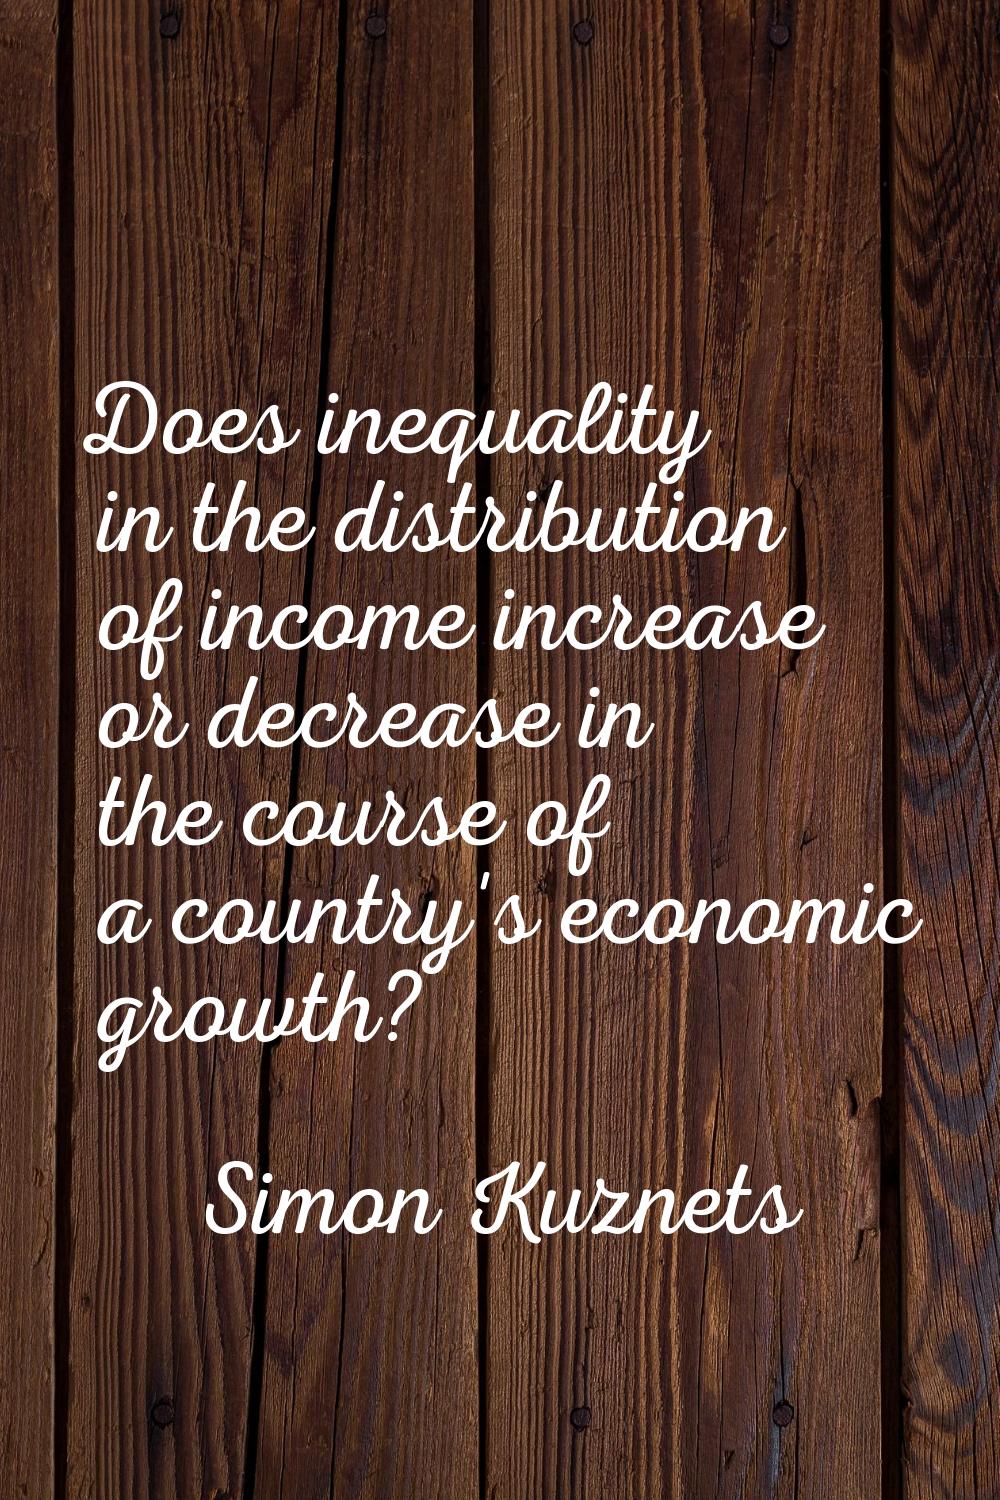 Does inequality in the distribution of income increase or decrease in the course of a country's eco